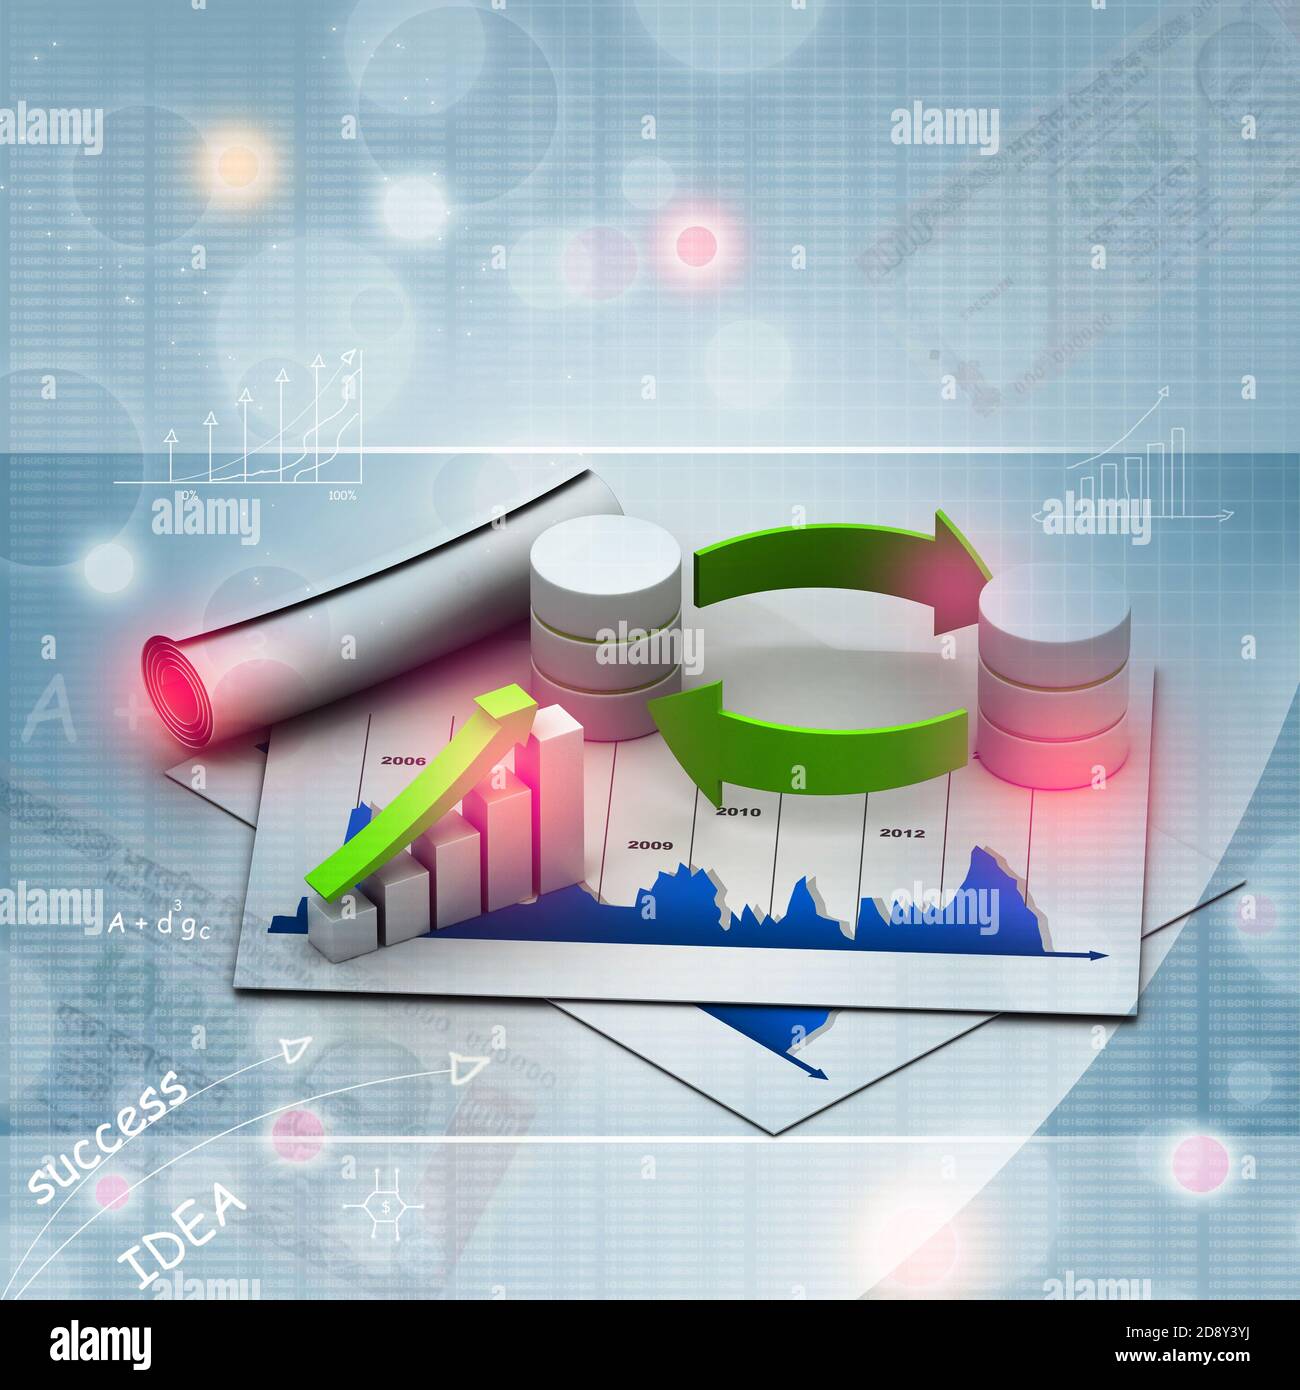 Databases concept icon with graph in chart Stock Photo